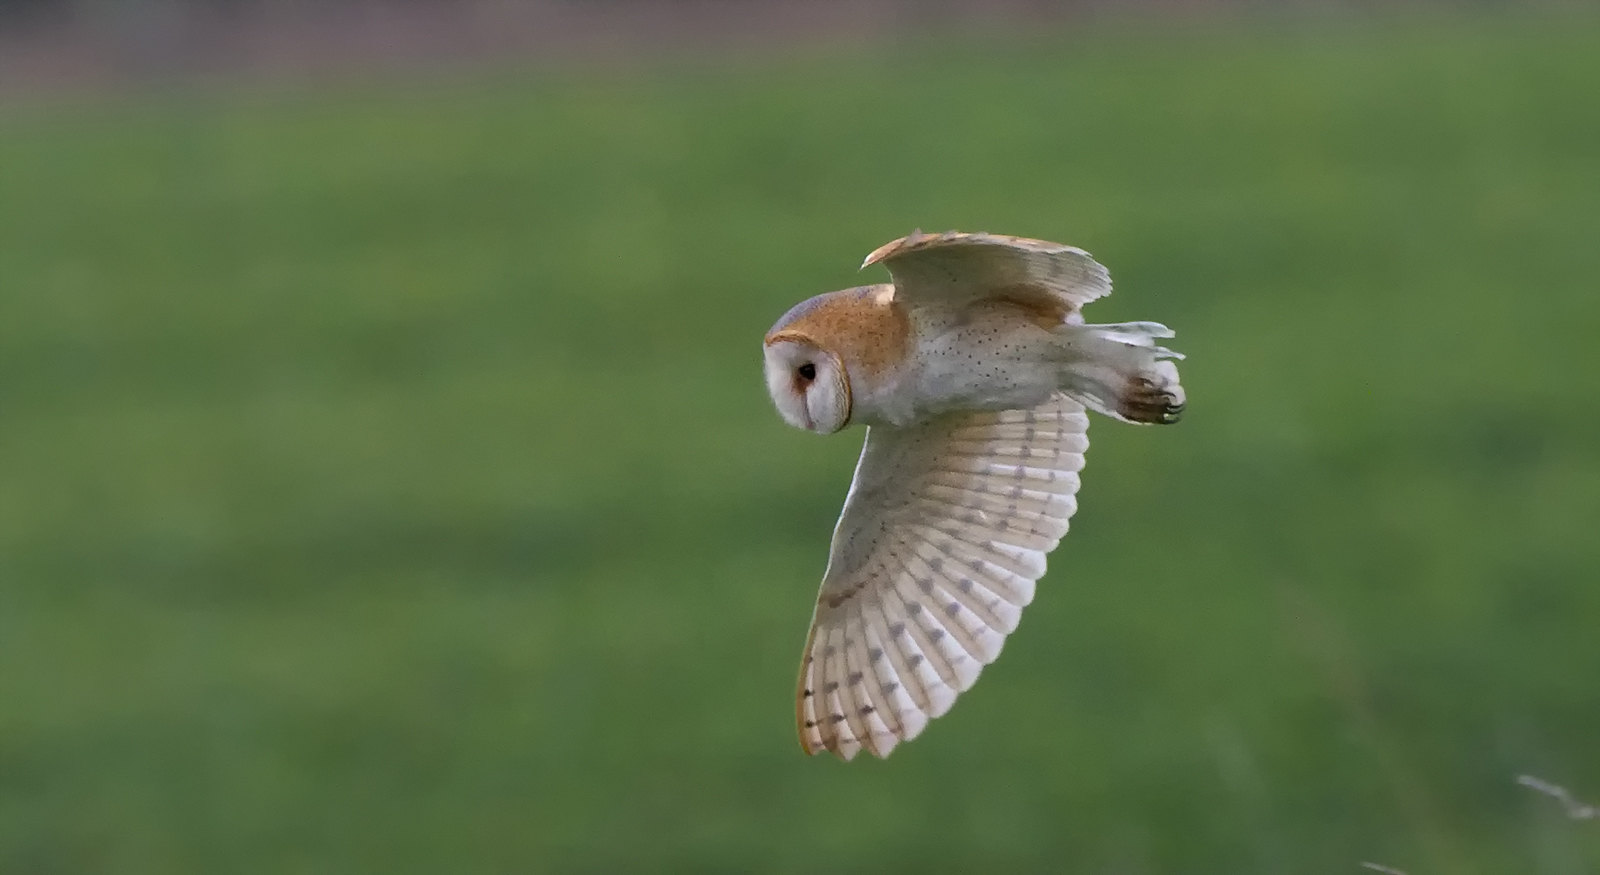 Barn Owl - difficult light, but not too bad.